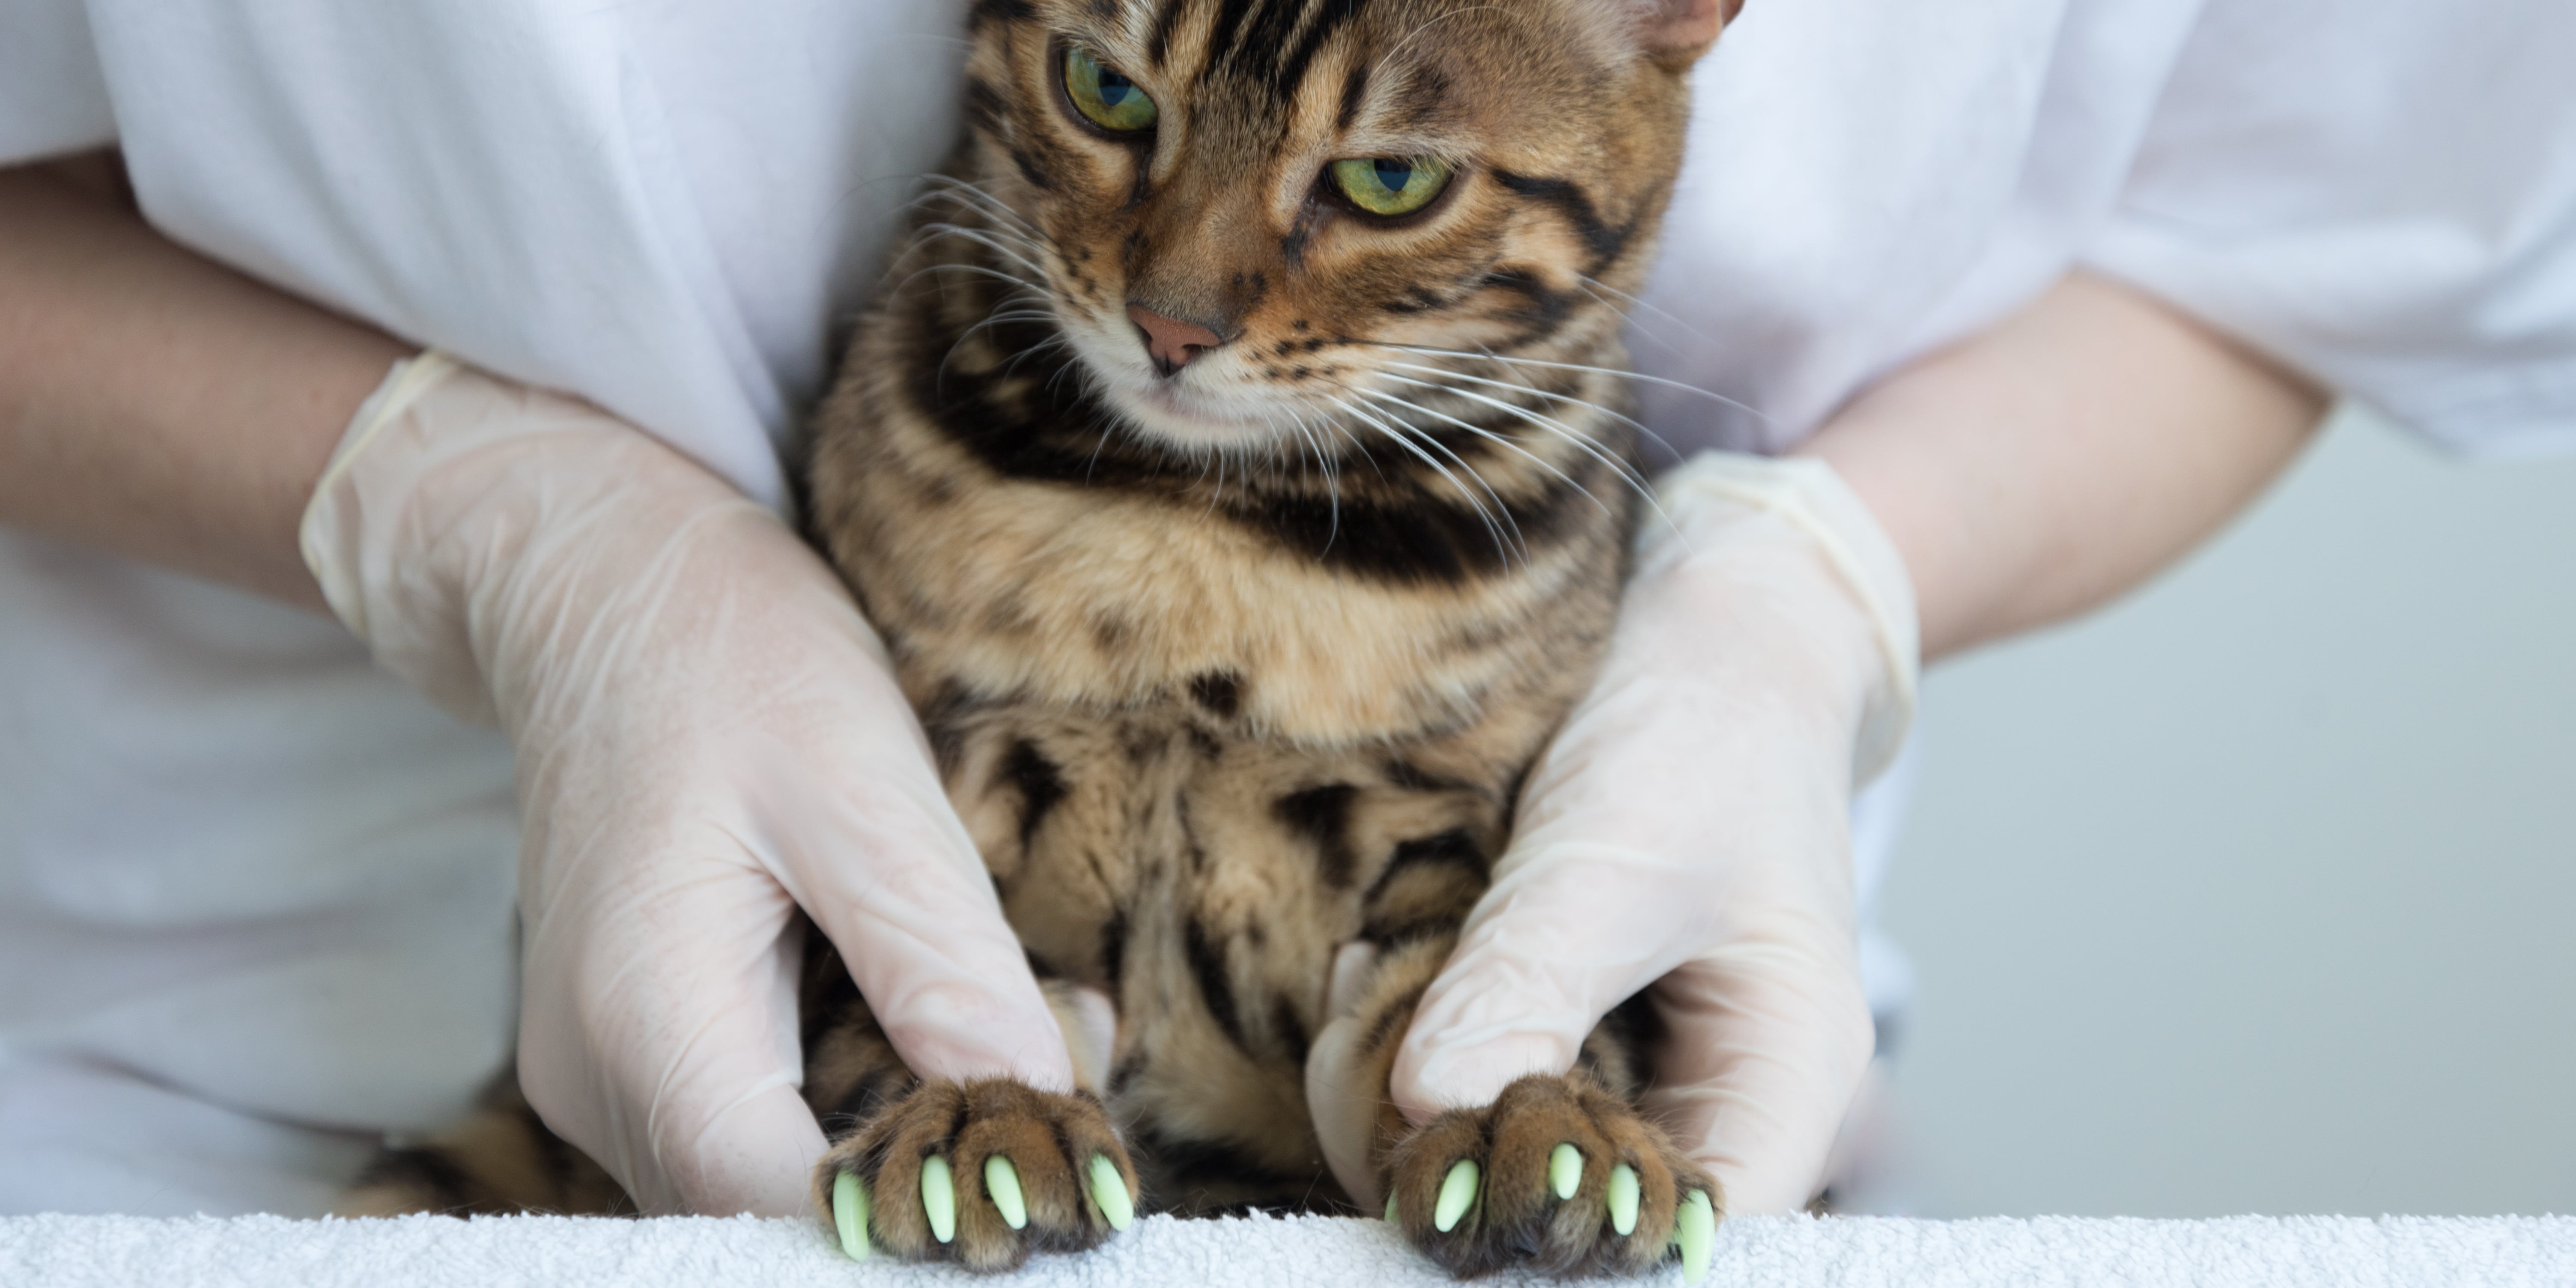 Cat Nail Caps: Pros, Cons, and Alternatives to Consider